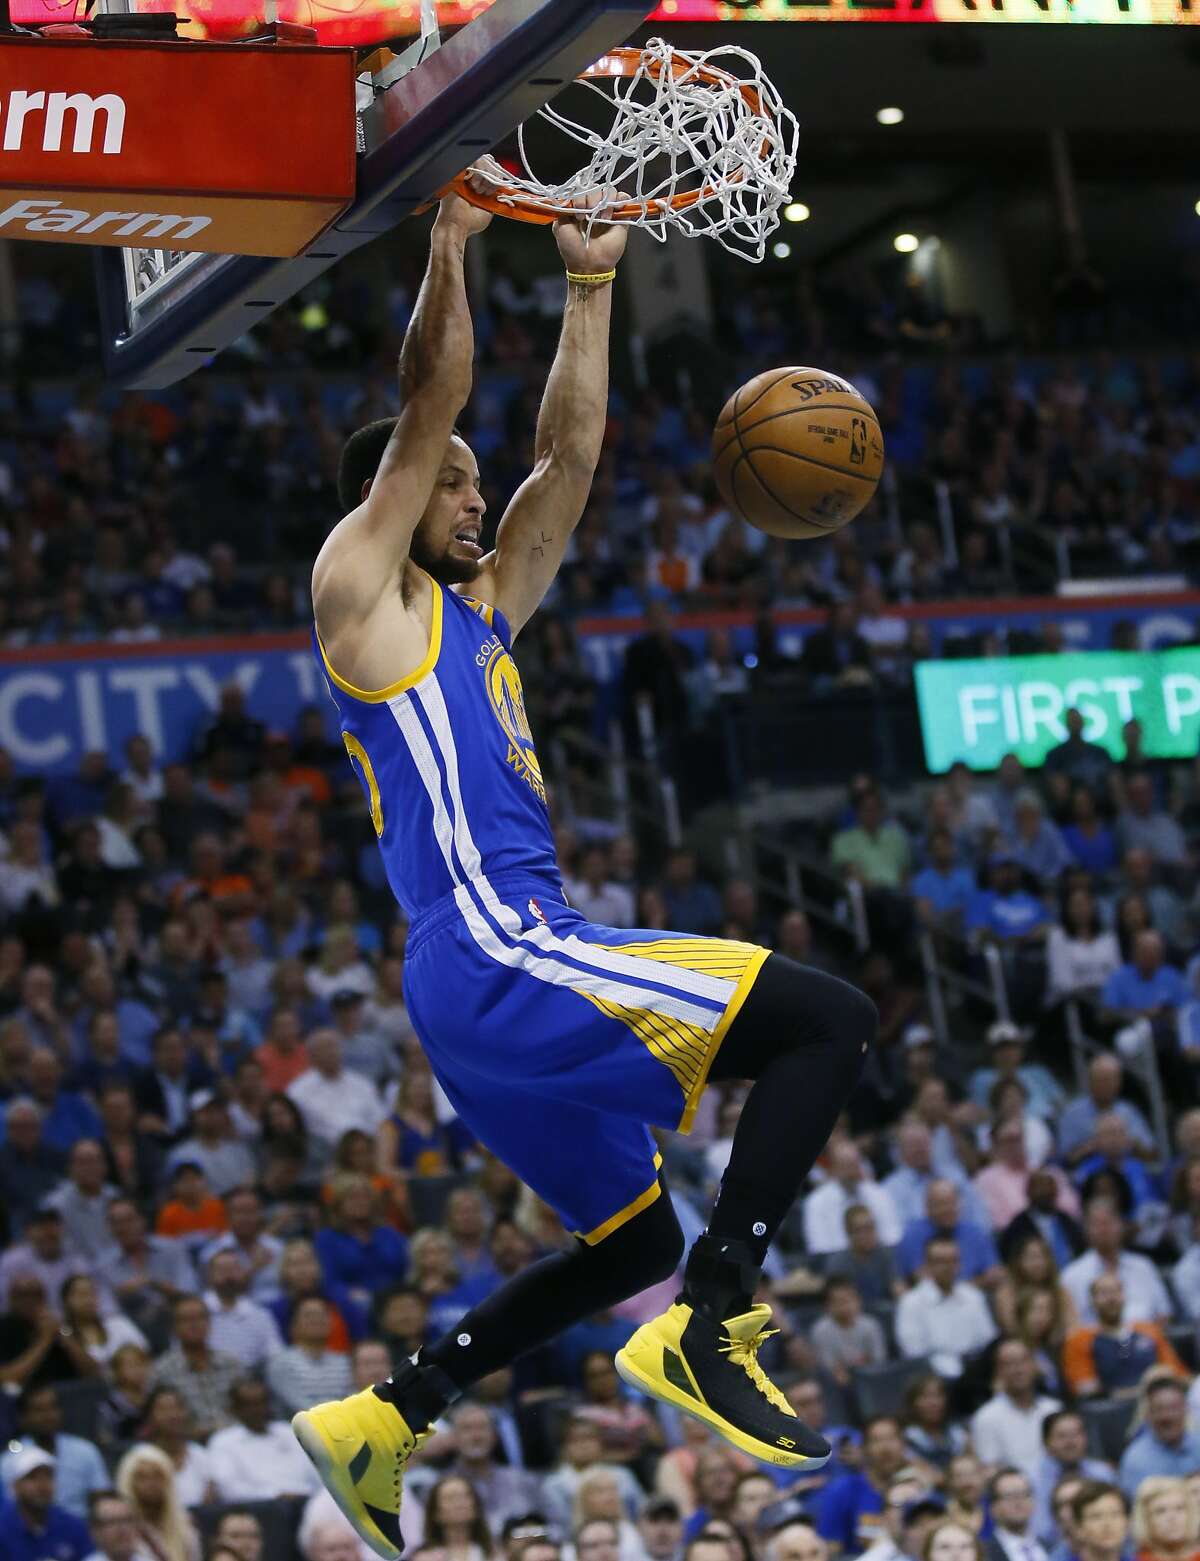 Golden State Warriors guard Stephen Curry dunks during the first quarter of an NBA basketball game against the Oklahoma City Thunder in Oklahoma City, Monday, March 20, 2017. (AP Photo/Sue Ogrocki)